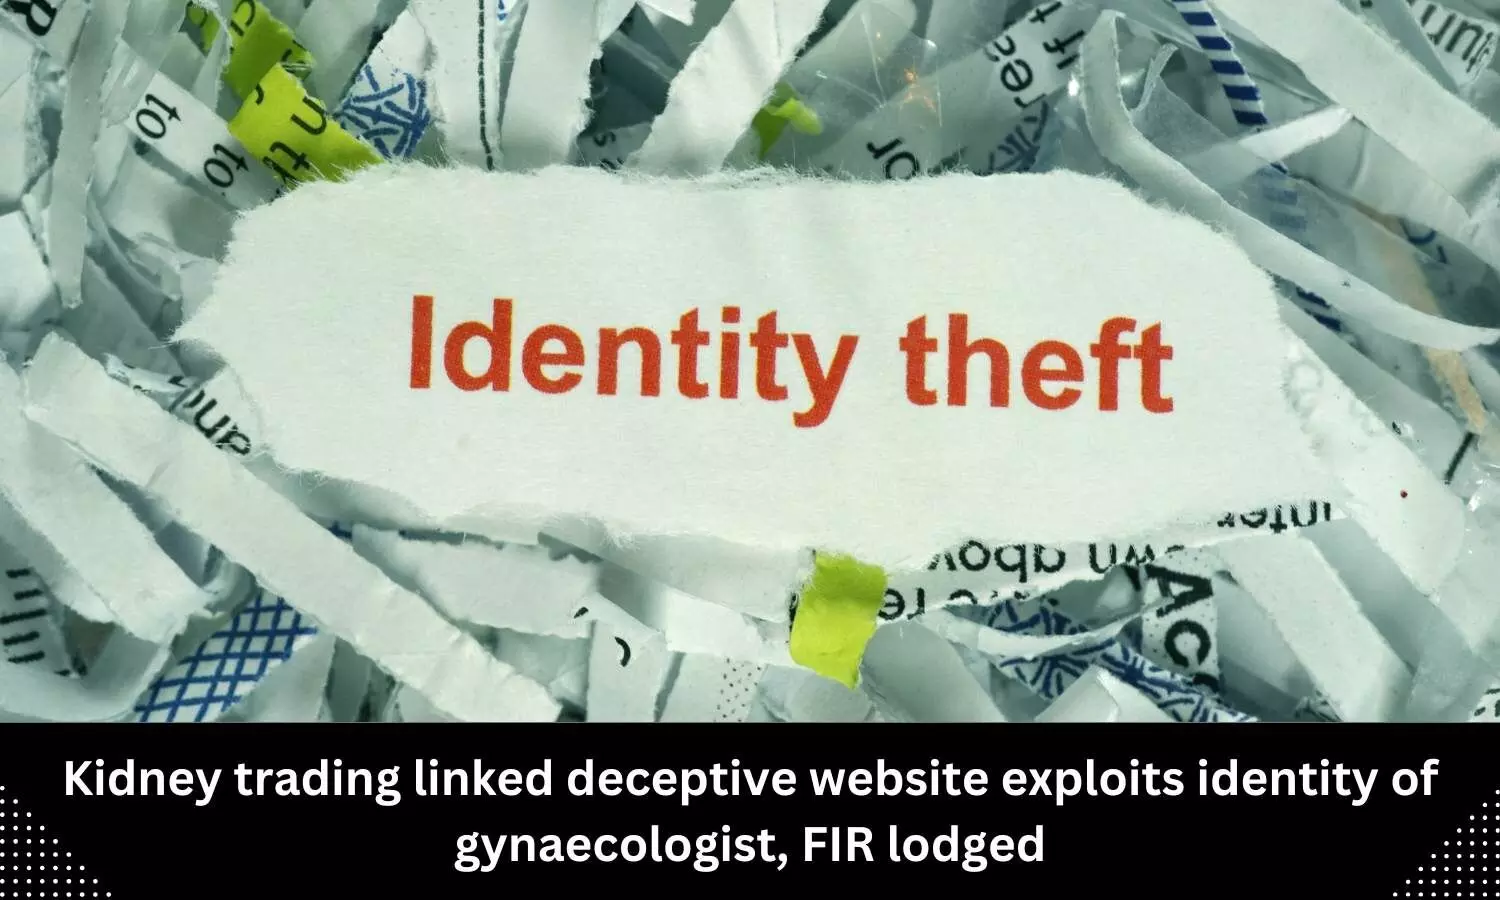 Gynaecologist identity misused by cybercriminals to construct fake website dedicated to kidney trade